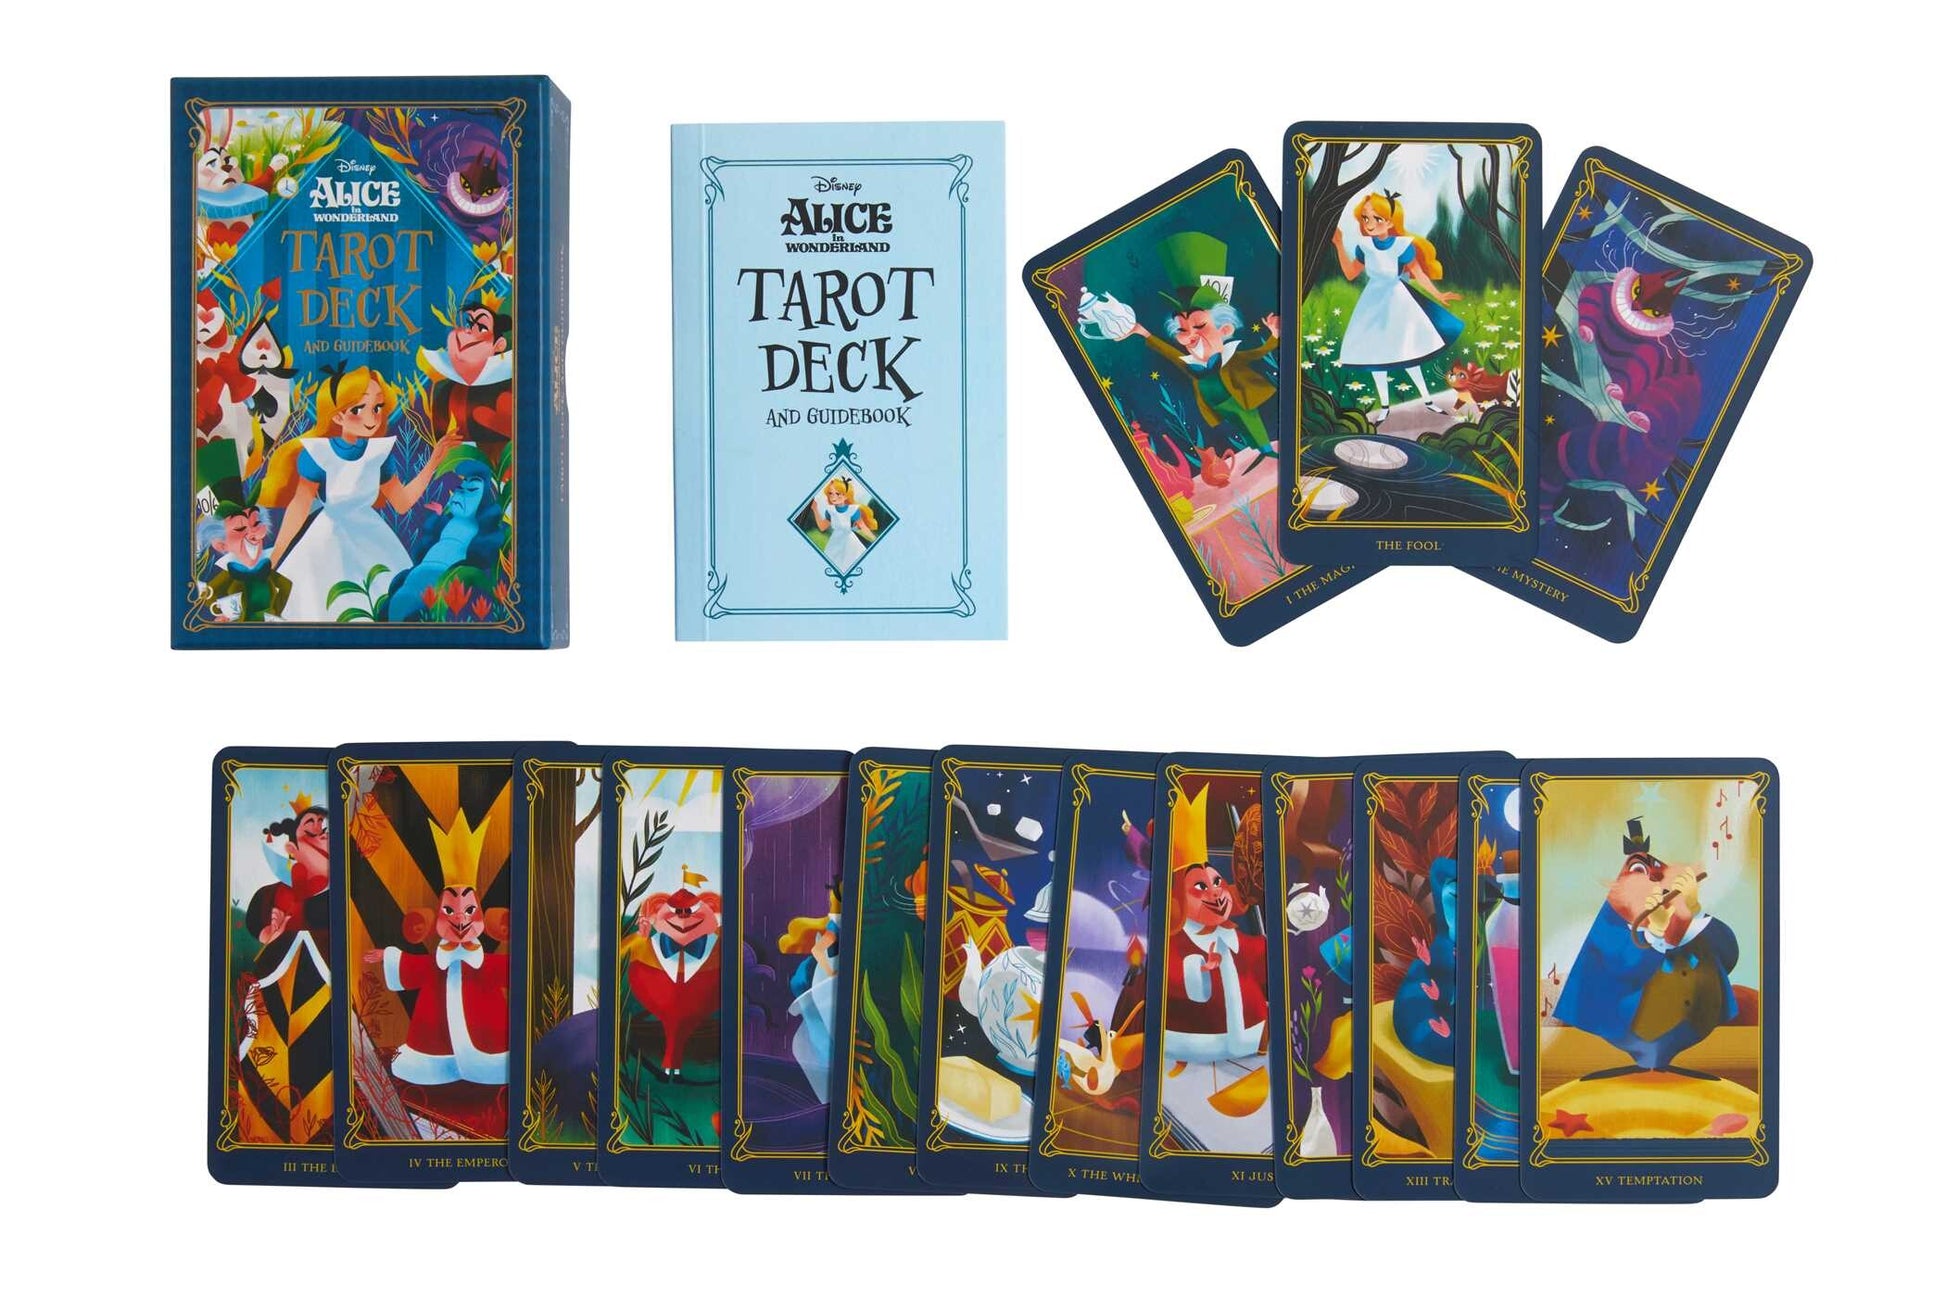 Deck and card spread